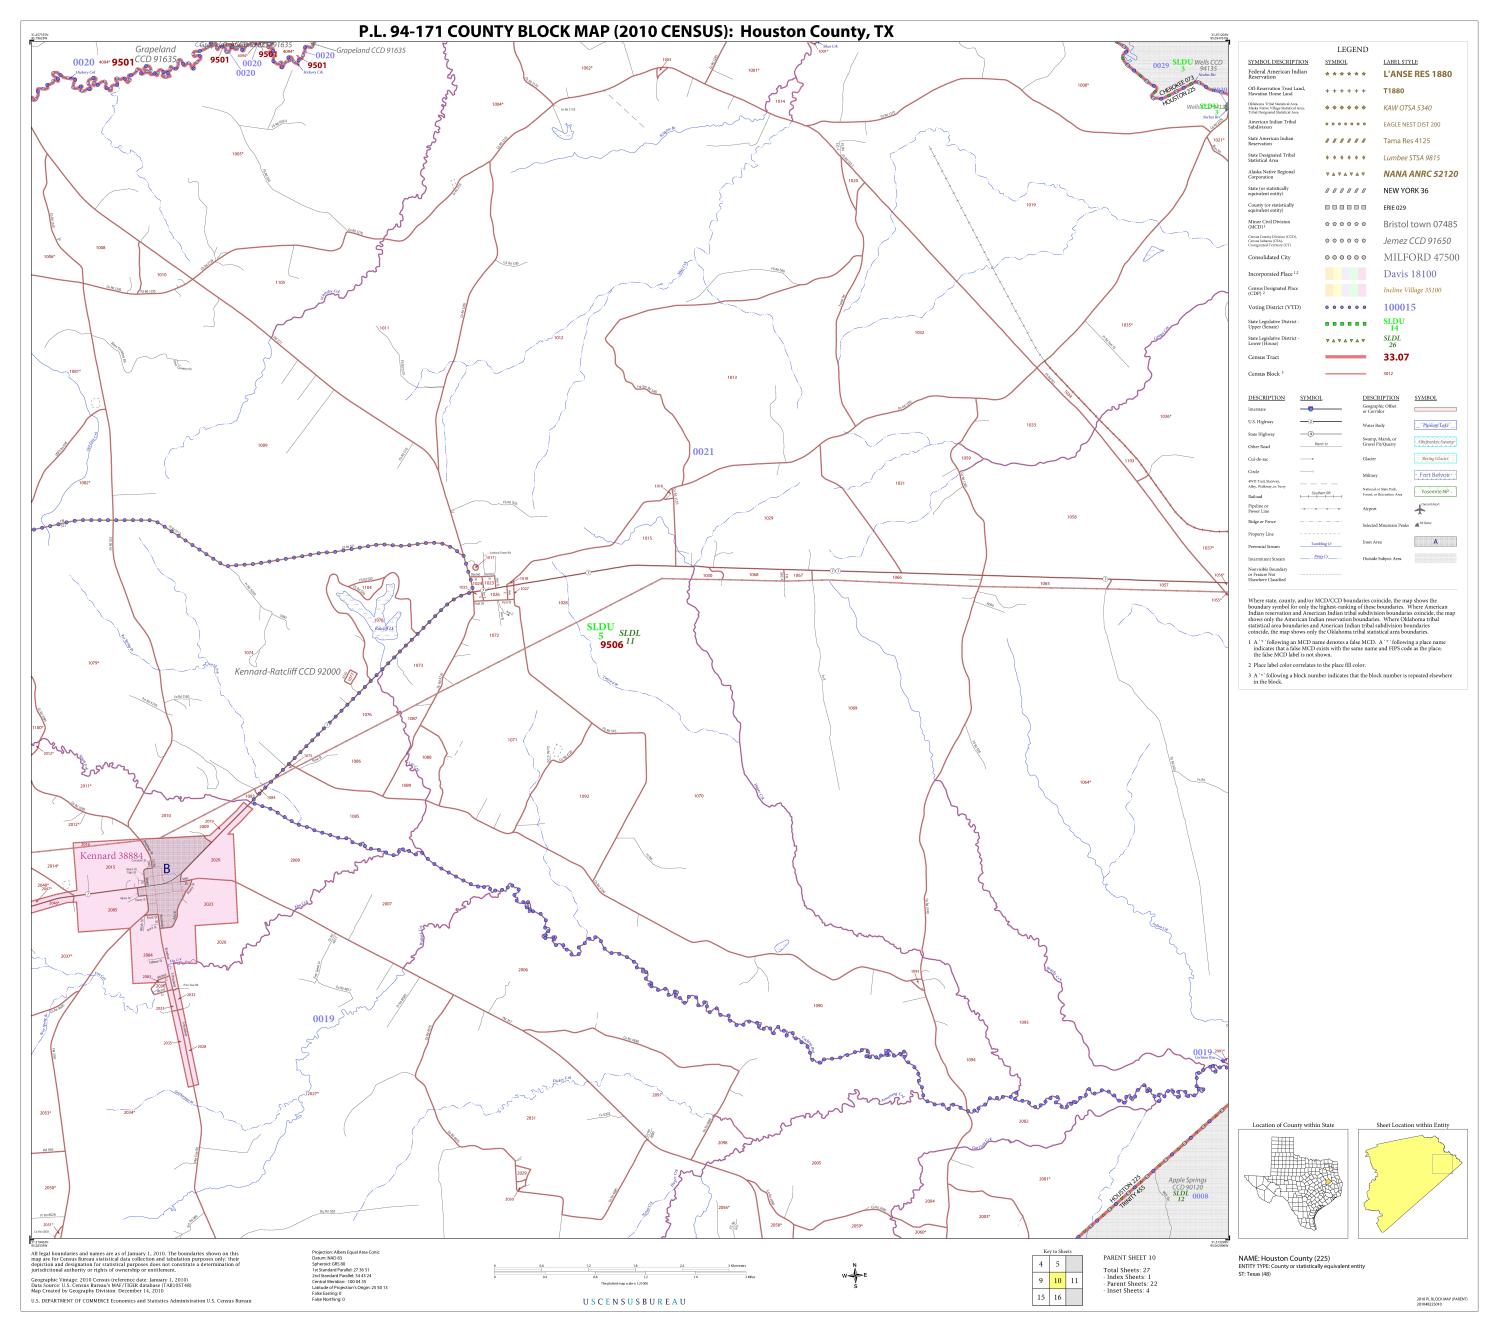 P.L. 94-171 County Block Map (2010 Census): Houston County, Block 10
                                                
                                                    [Sequence #]: 1 of 1
                                                